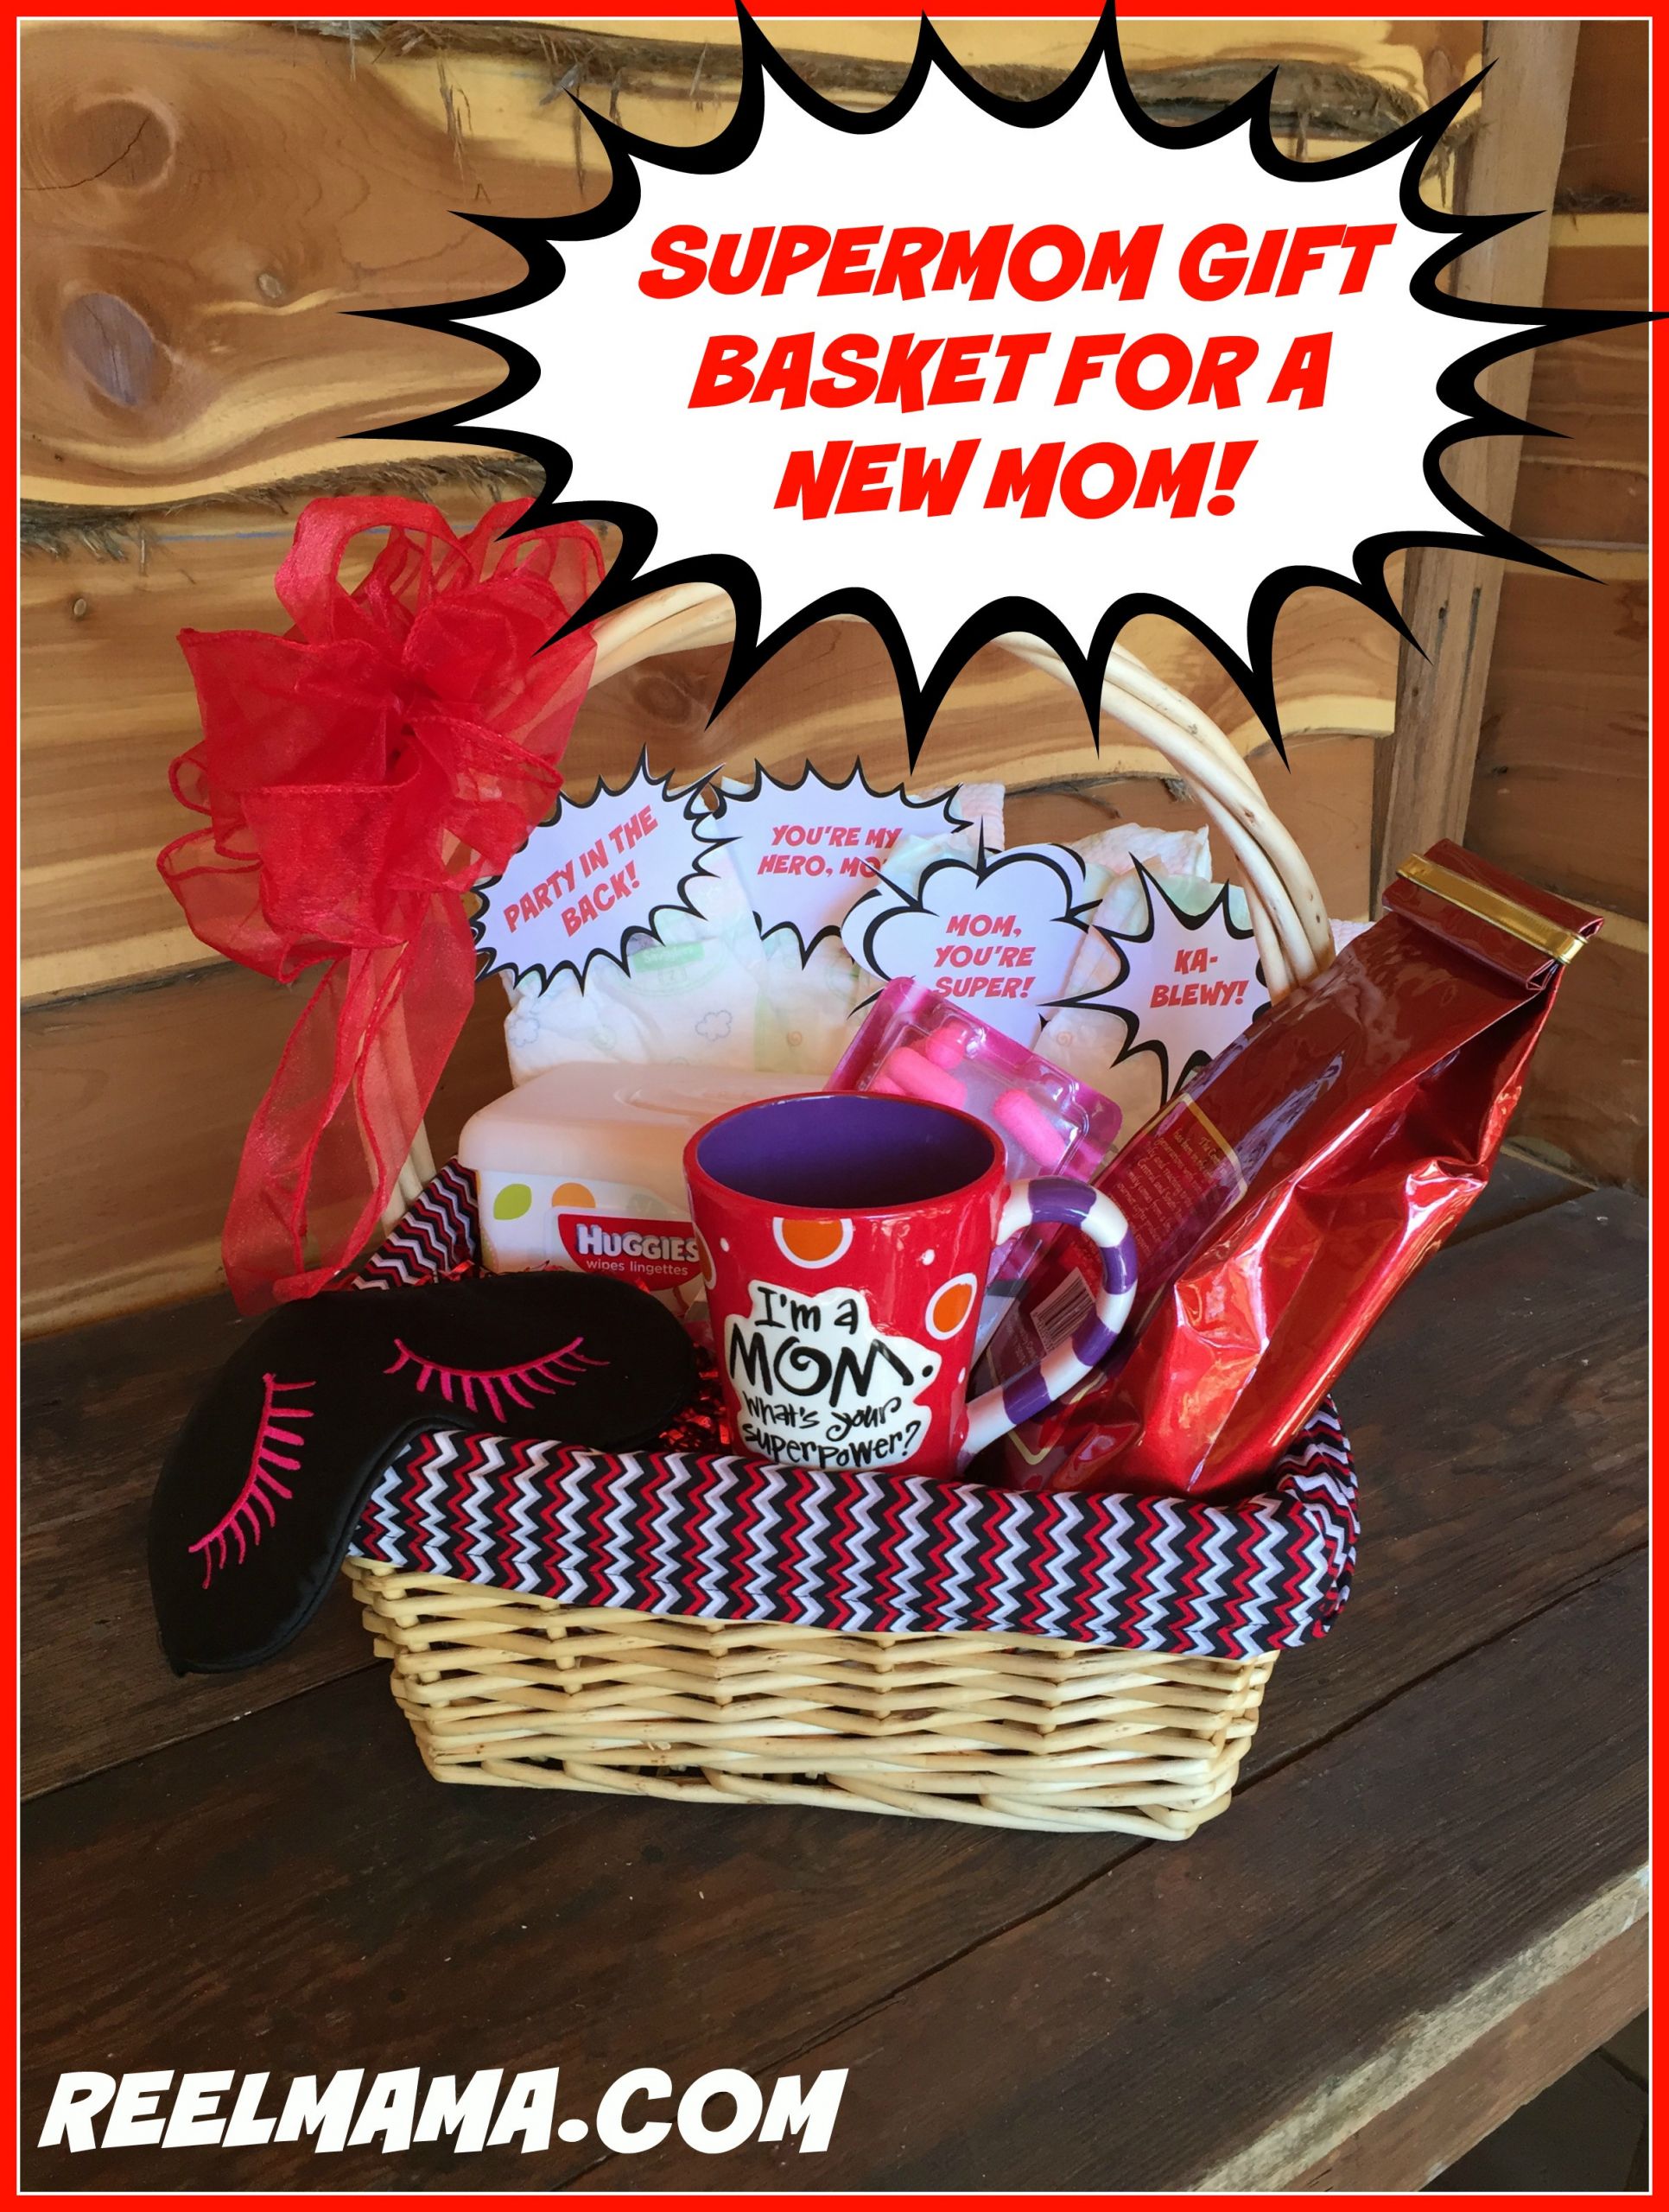 New Mommy Gift Basket Ideas
 Supermom t basket for a new mom Reelmama